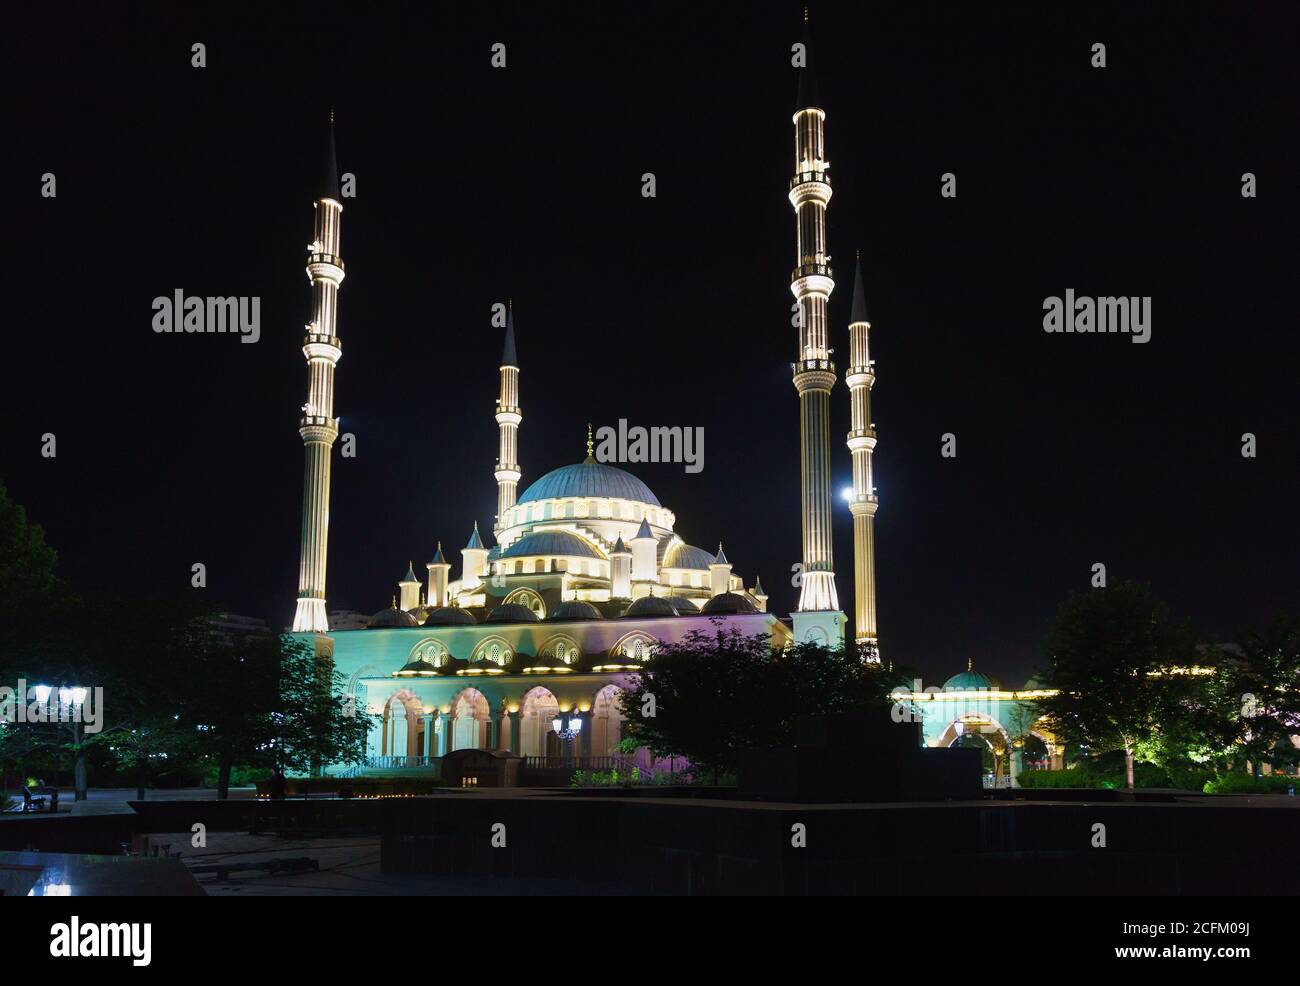 Grozny, Chechen Republic, Russia - June 01, 2019: Mosque Heart of Chechnya named after Akhmat Kadyrov, built in 2008 in the city center. A popular att Stock Photo